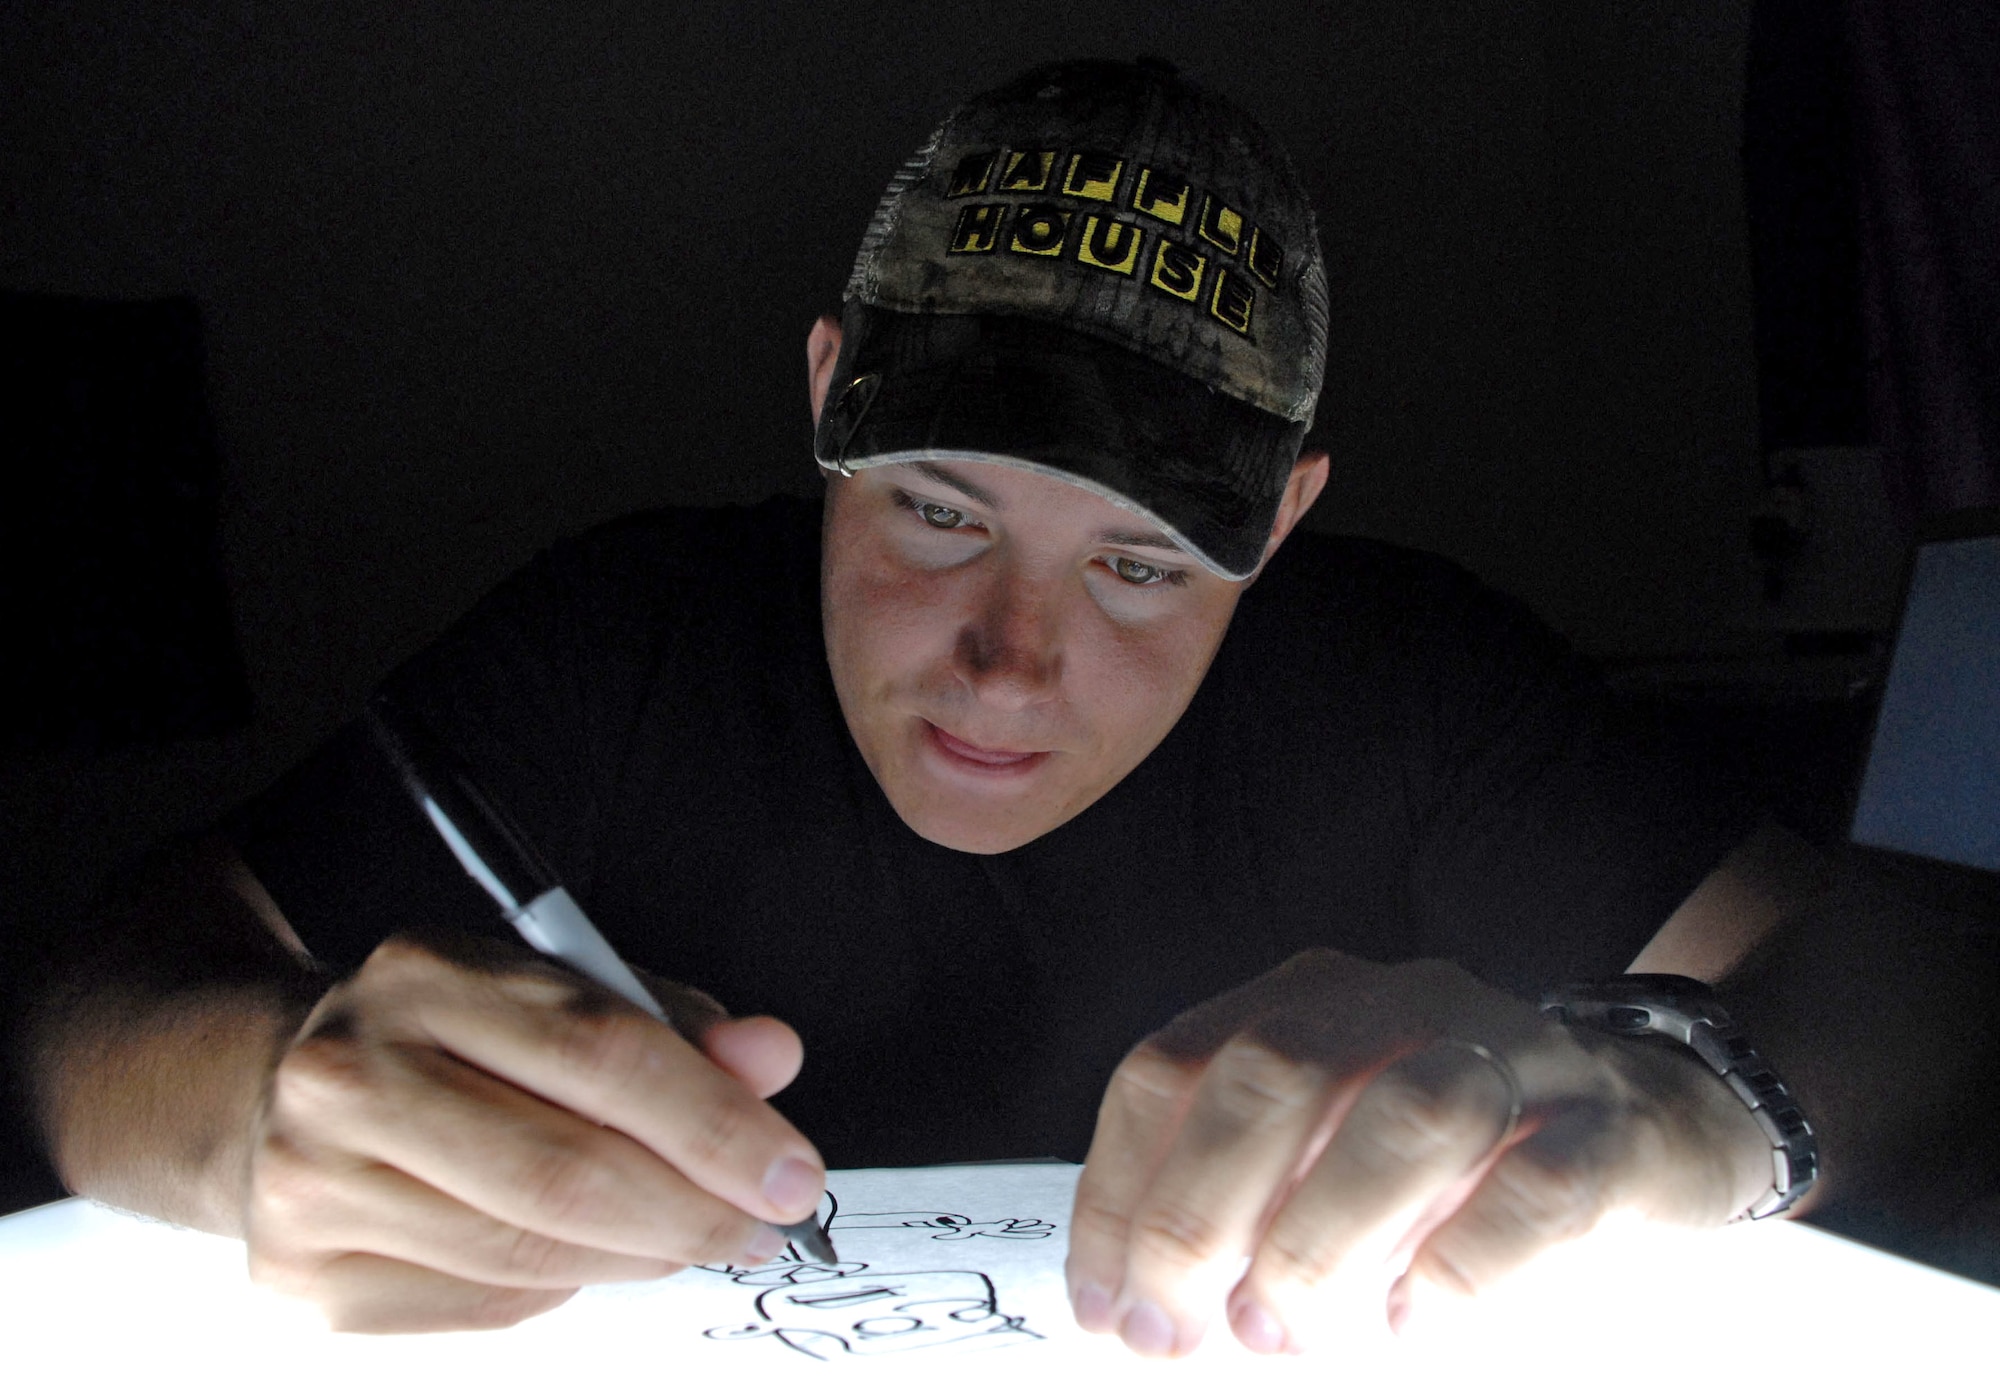 Staff Sgt. Austin M. May works on a character from his comic strip, Air Force Blues, Jan. 2 at Soto Cano Air Base, Honduras. Sergeant May recently published a book of his comics, and Air Force Blues is slated to appear in an upcoming issue of Airman Magazine. Sergeant May is a public affairs specialist deployed from Laughlin Air Force Base, Texas. (U.S. Air Force photo/Tech. Sgt. Sonny Cohrs) 